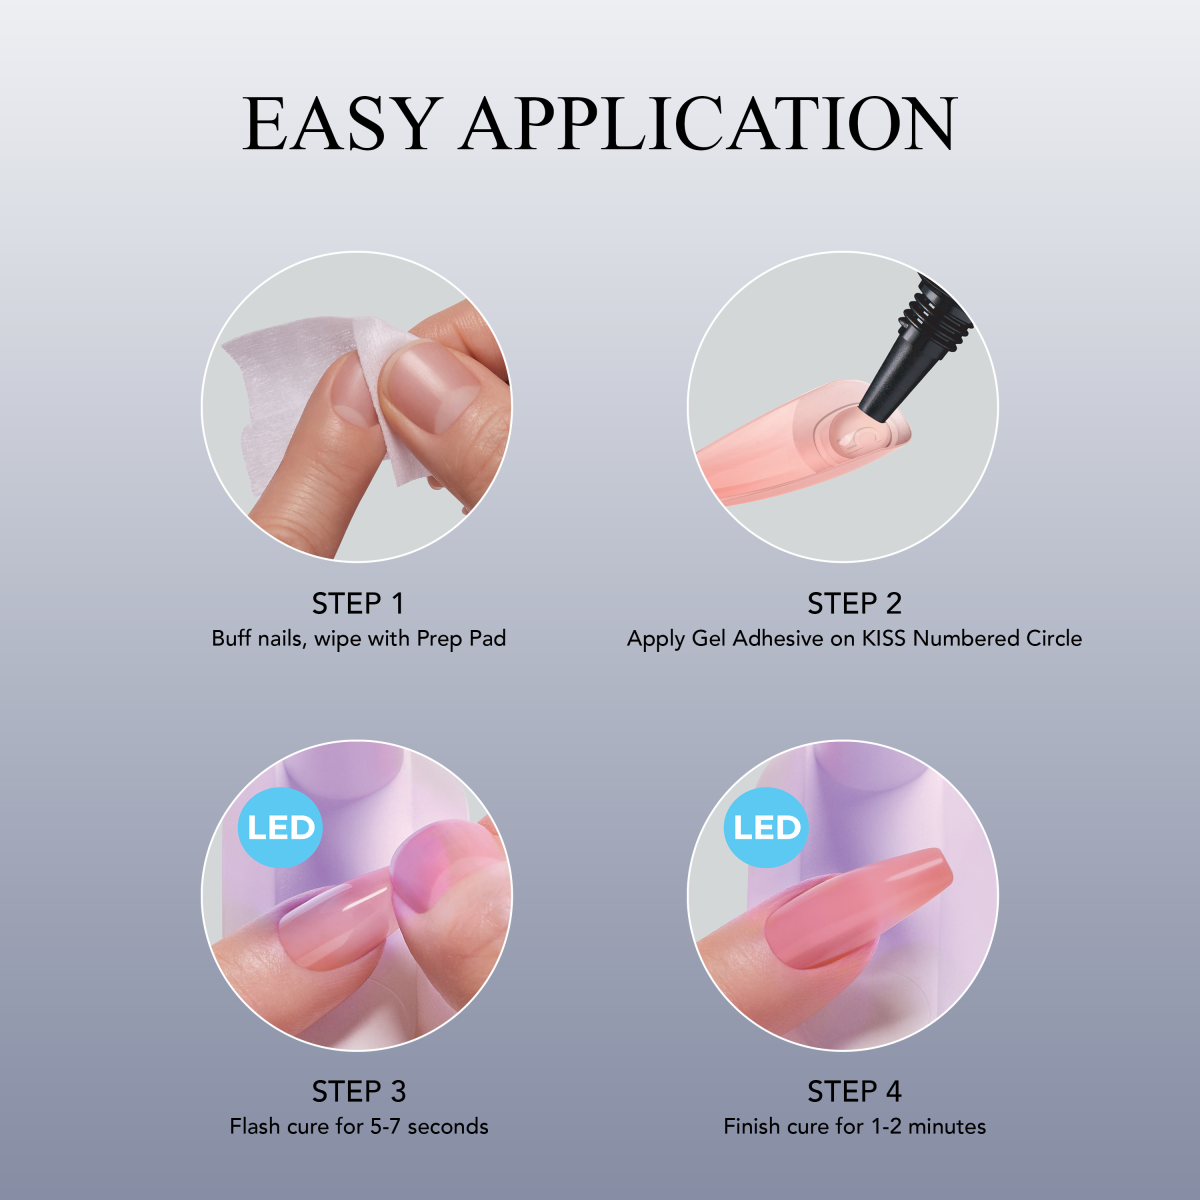 Extension Gel for Nails Nude Pink Builder Gel Long Lasting Wear Natural  Look Nail Extension Gel for Beginners DIY Home Manicure Acrylic Nail  Thickening Builder Gel Salmon